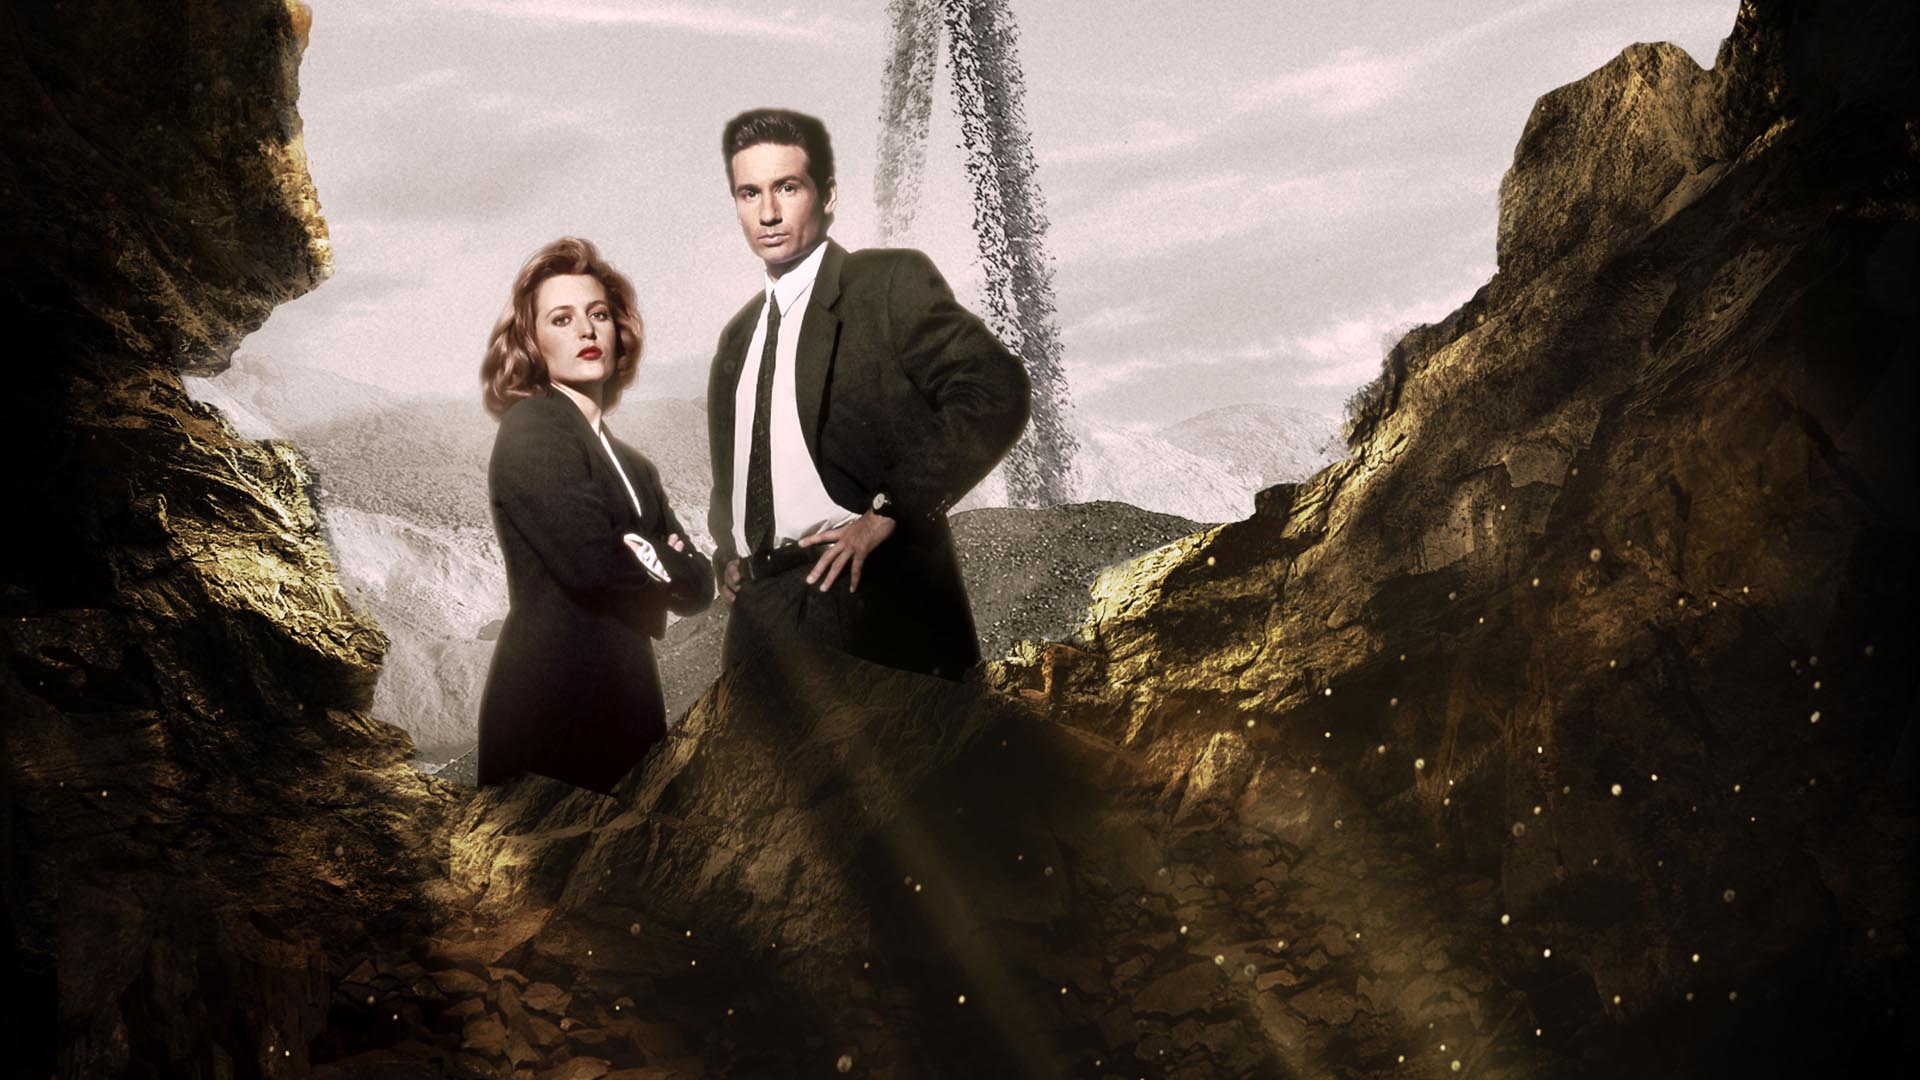 TV Show The X-Files HD Wallpaper Background Image. 